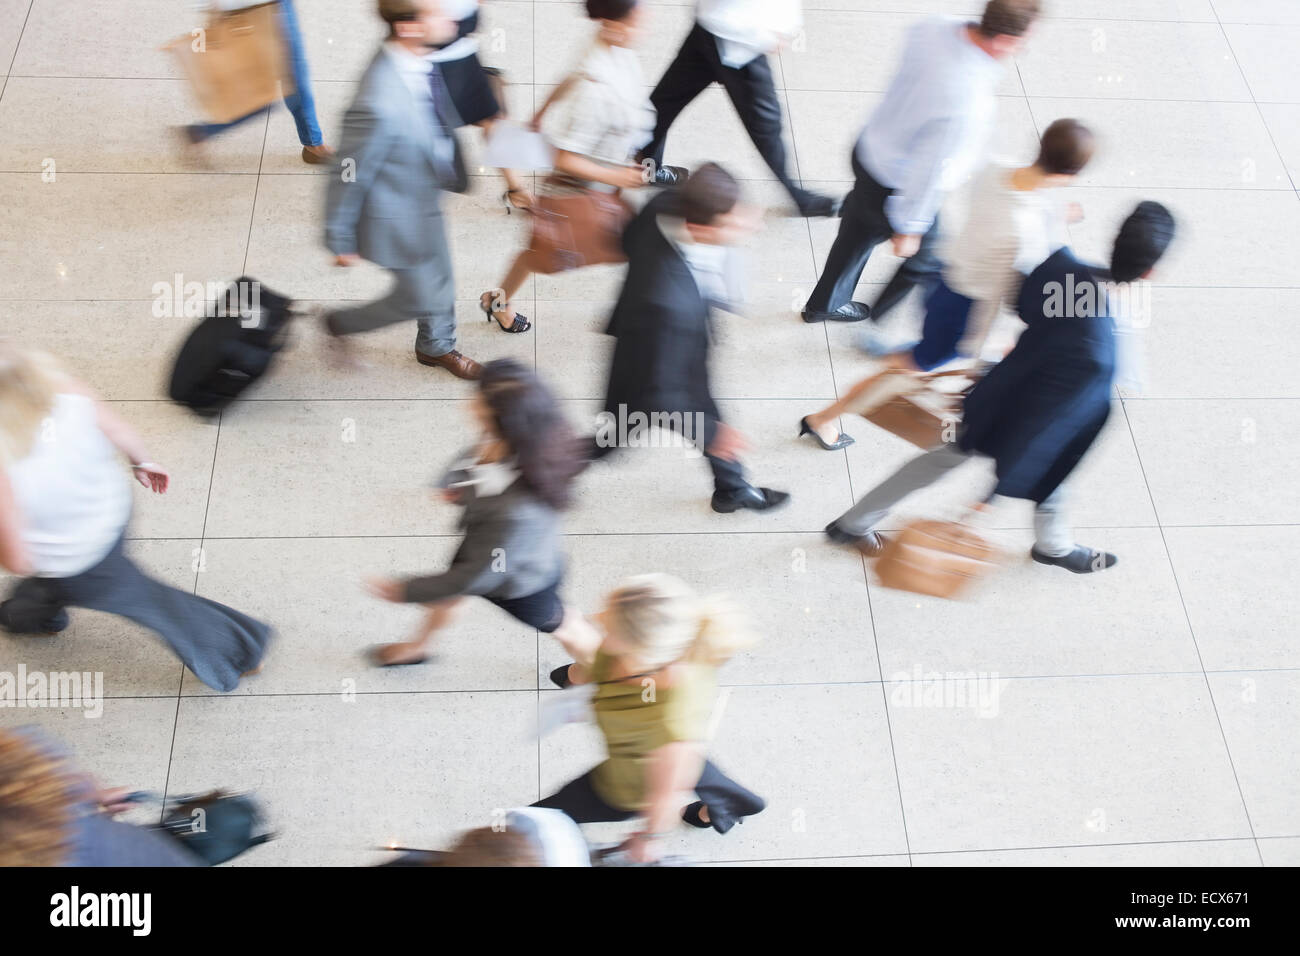 High angle view of business people walking in office on tiled floor Stock Photo